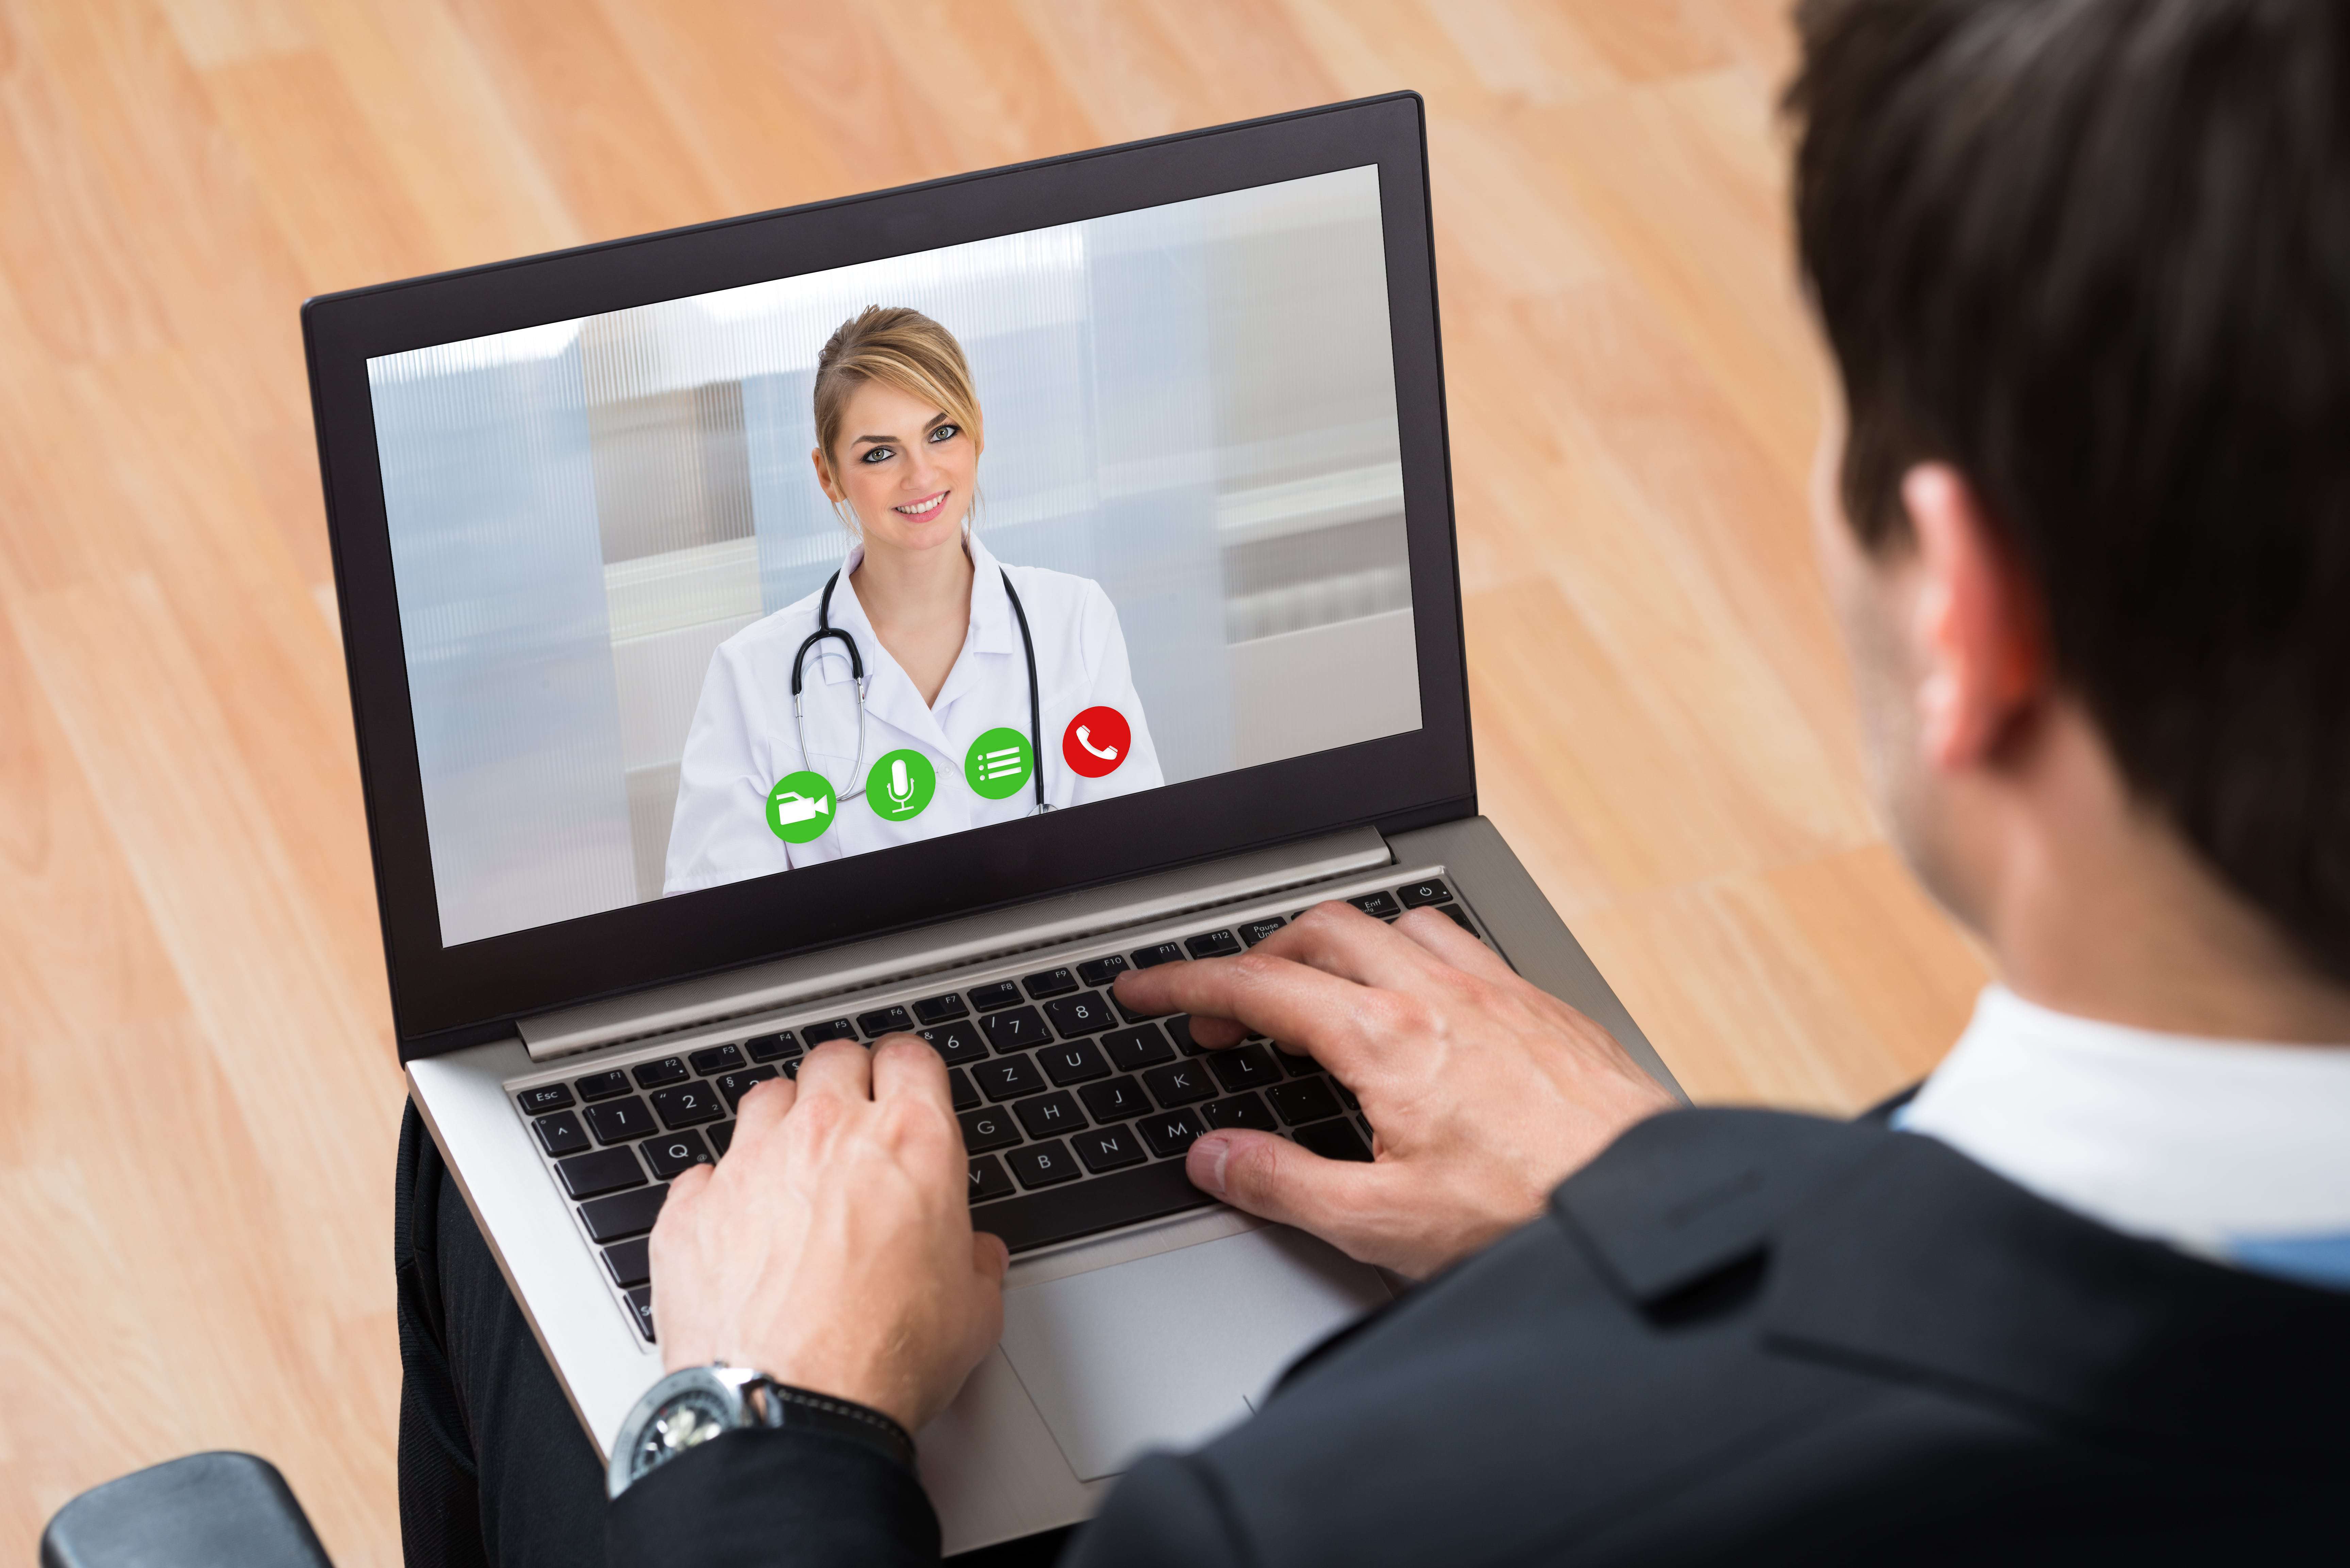 Only 1 in 10 patients use telehealth as lack of awareness hinders adoption, J.D. Power survey finds